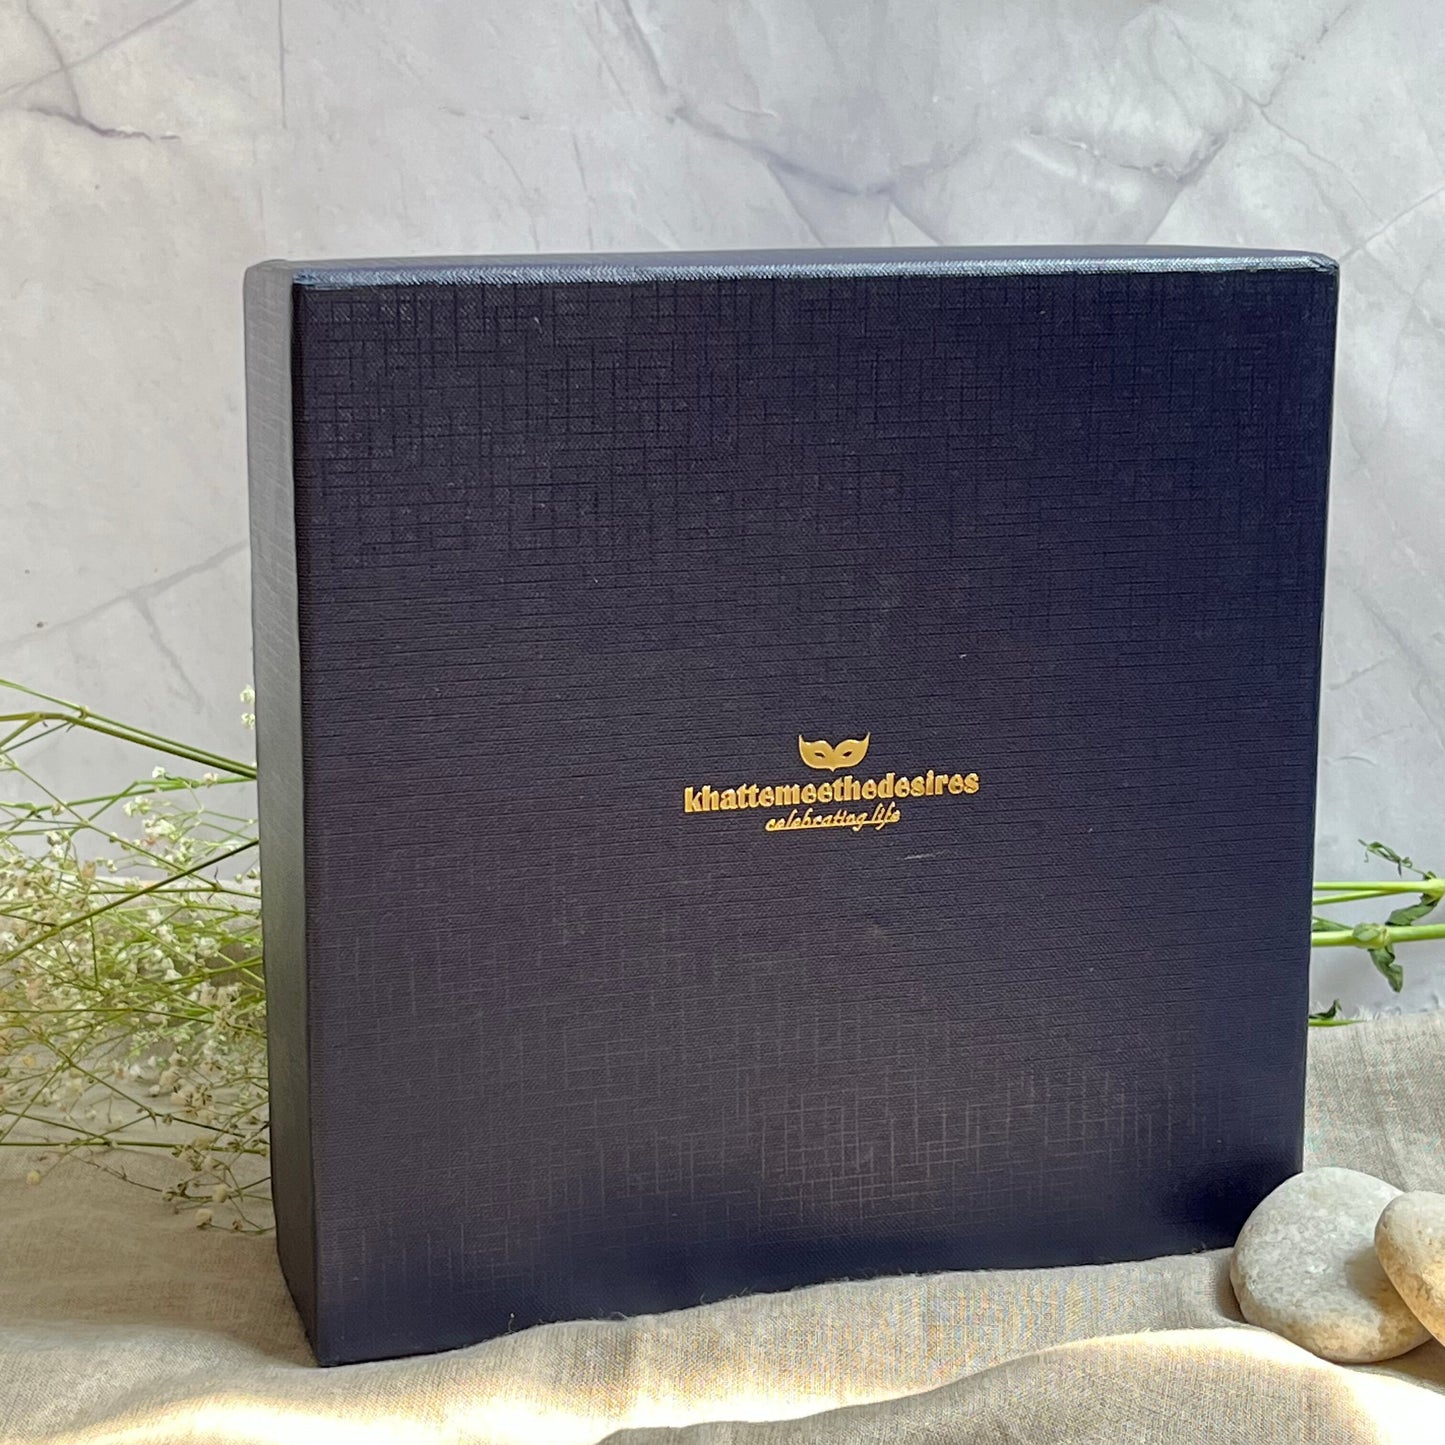 Amber Delight Candles Gift Box